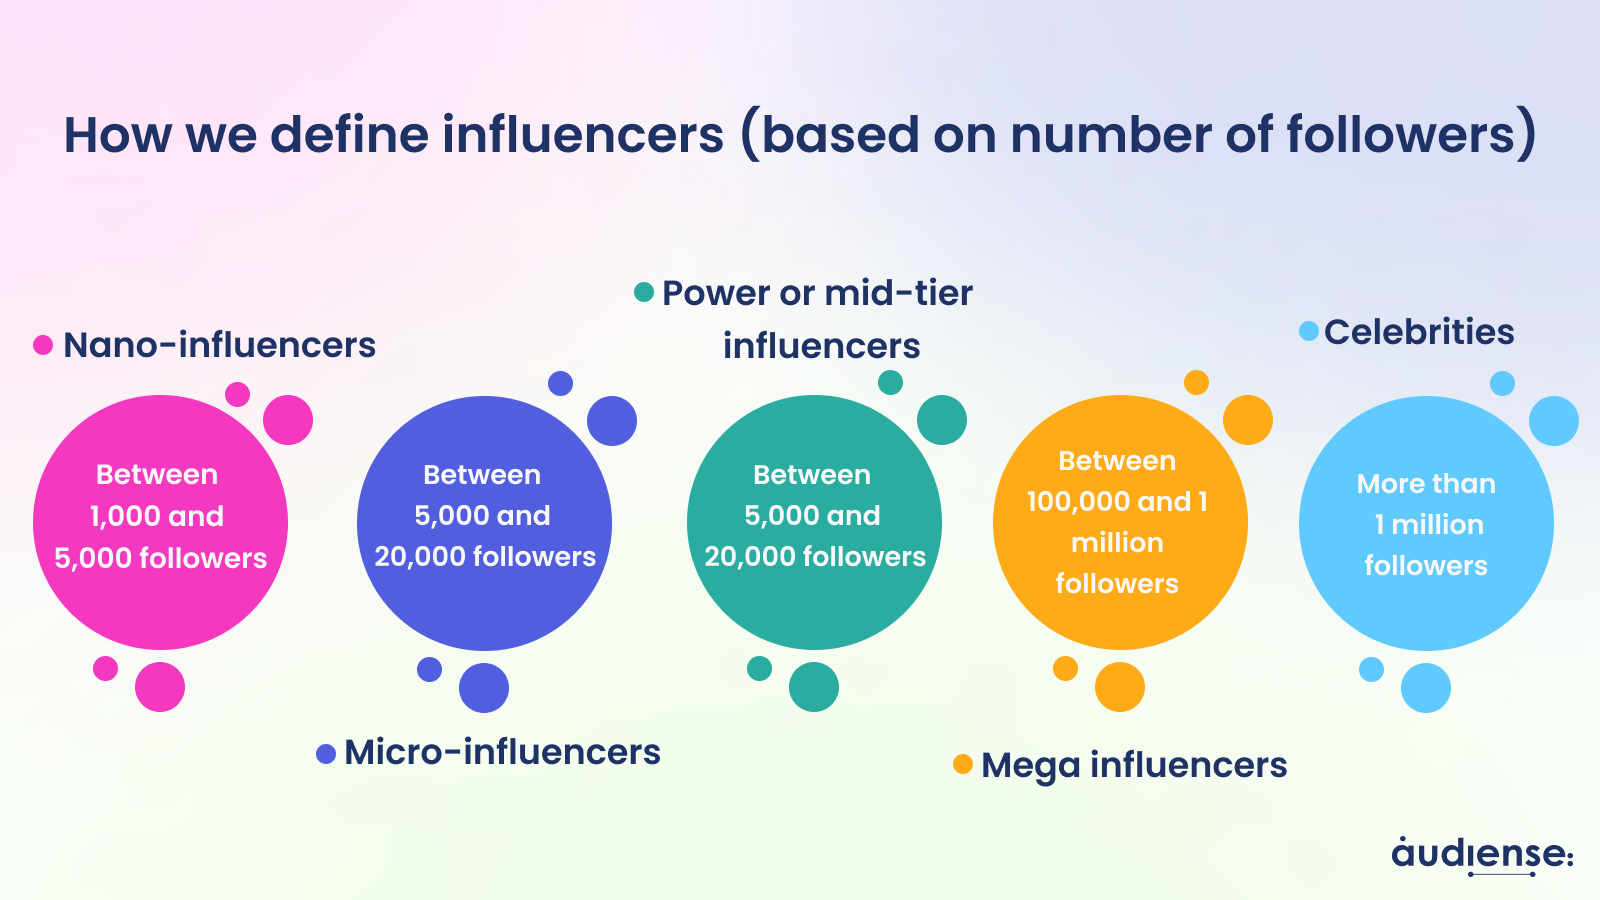 Audiense blog - How we define influencers (based on number of followers)